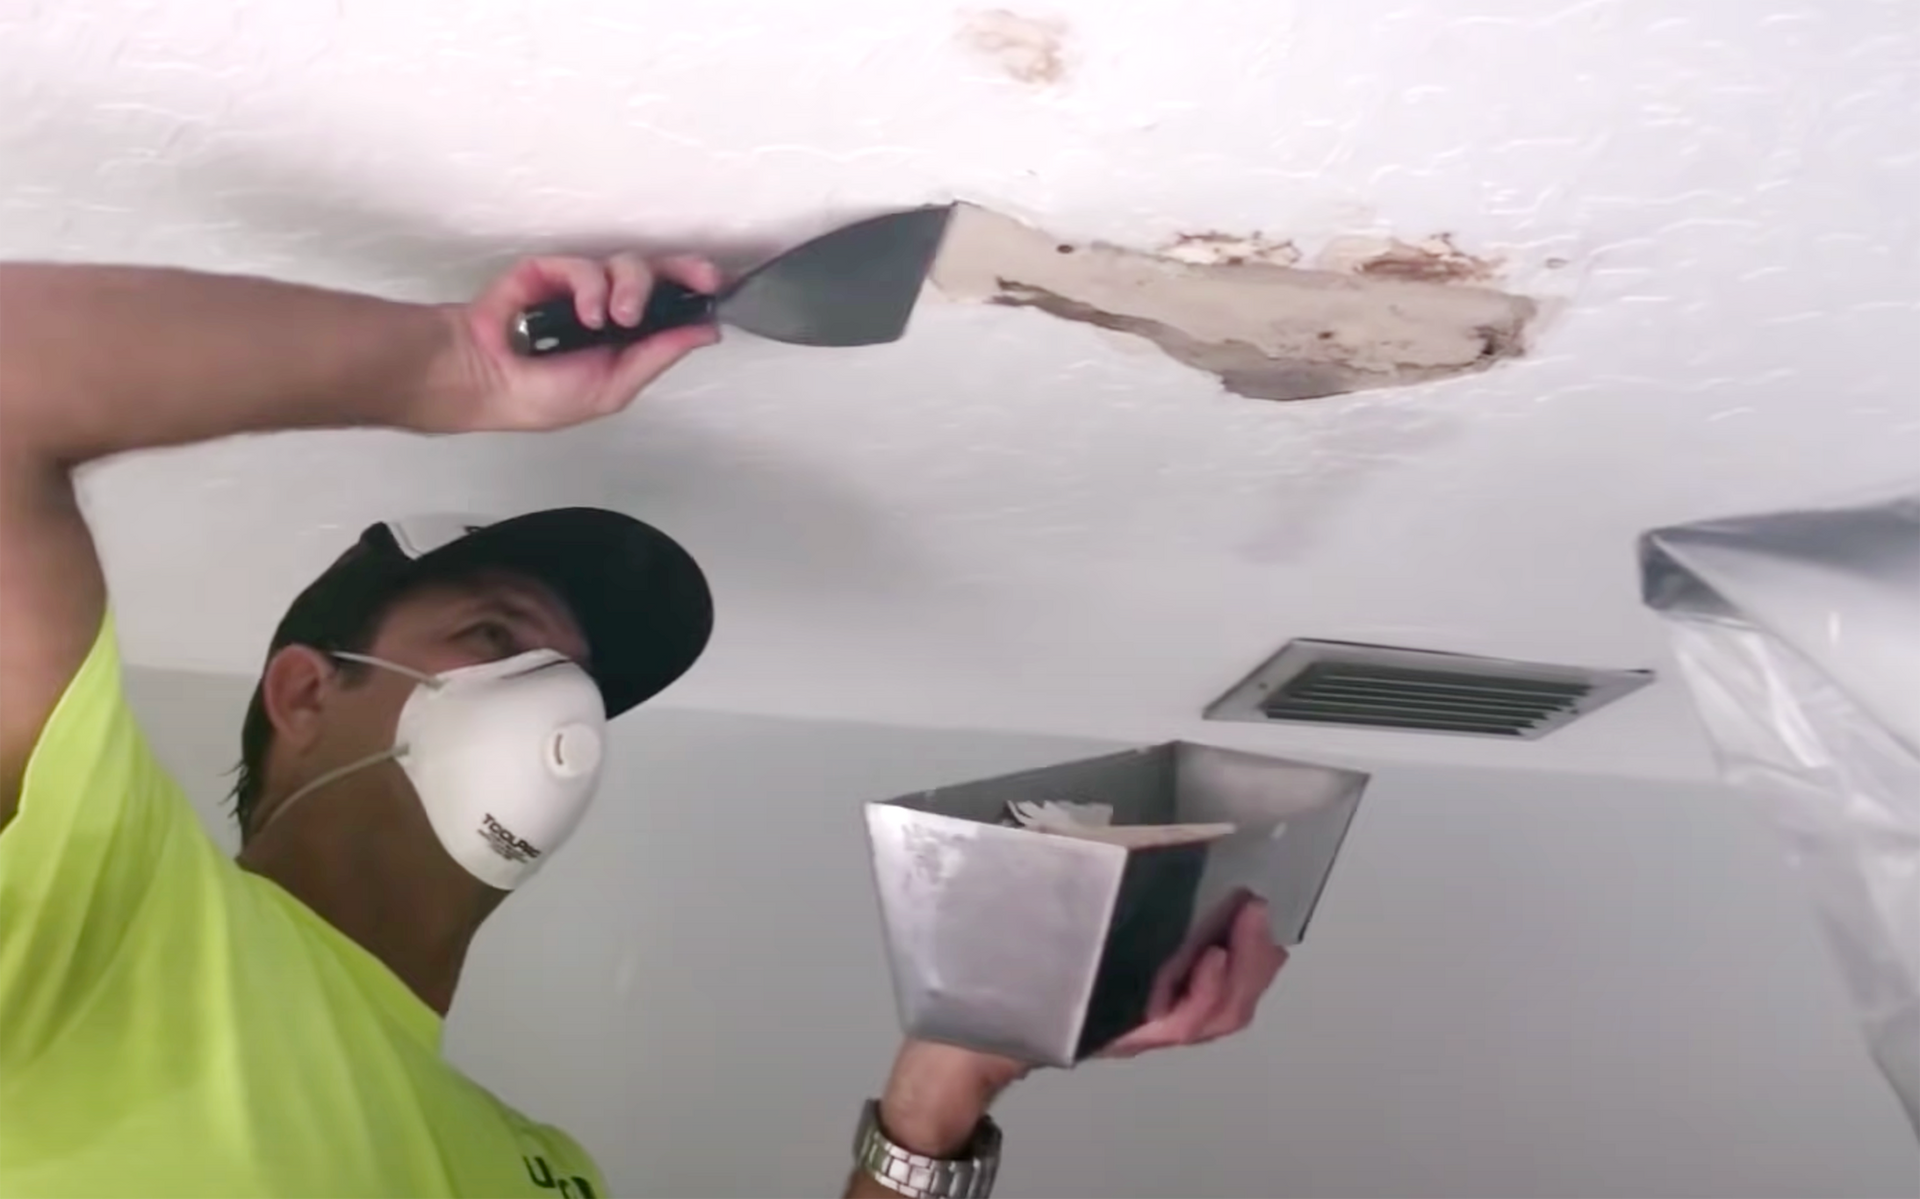 An image of drywall repair happening on a ceiling.